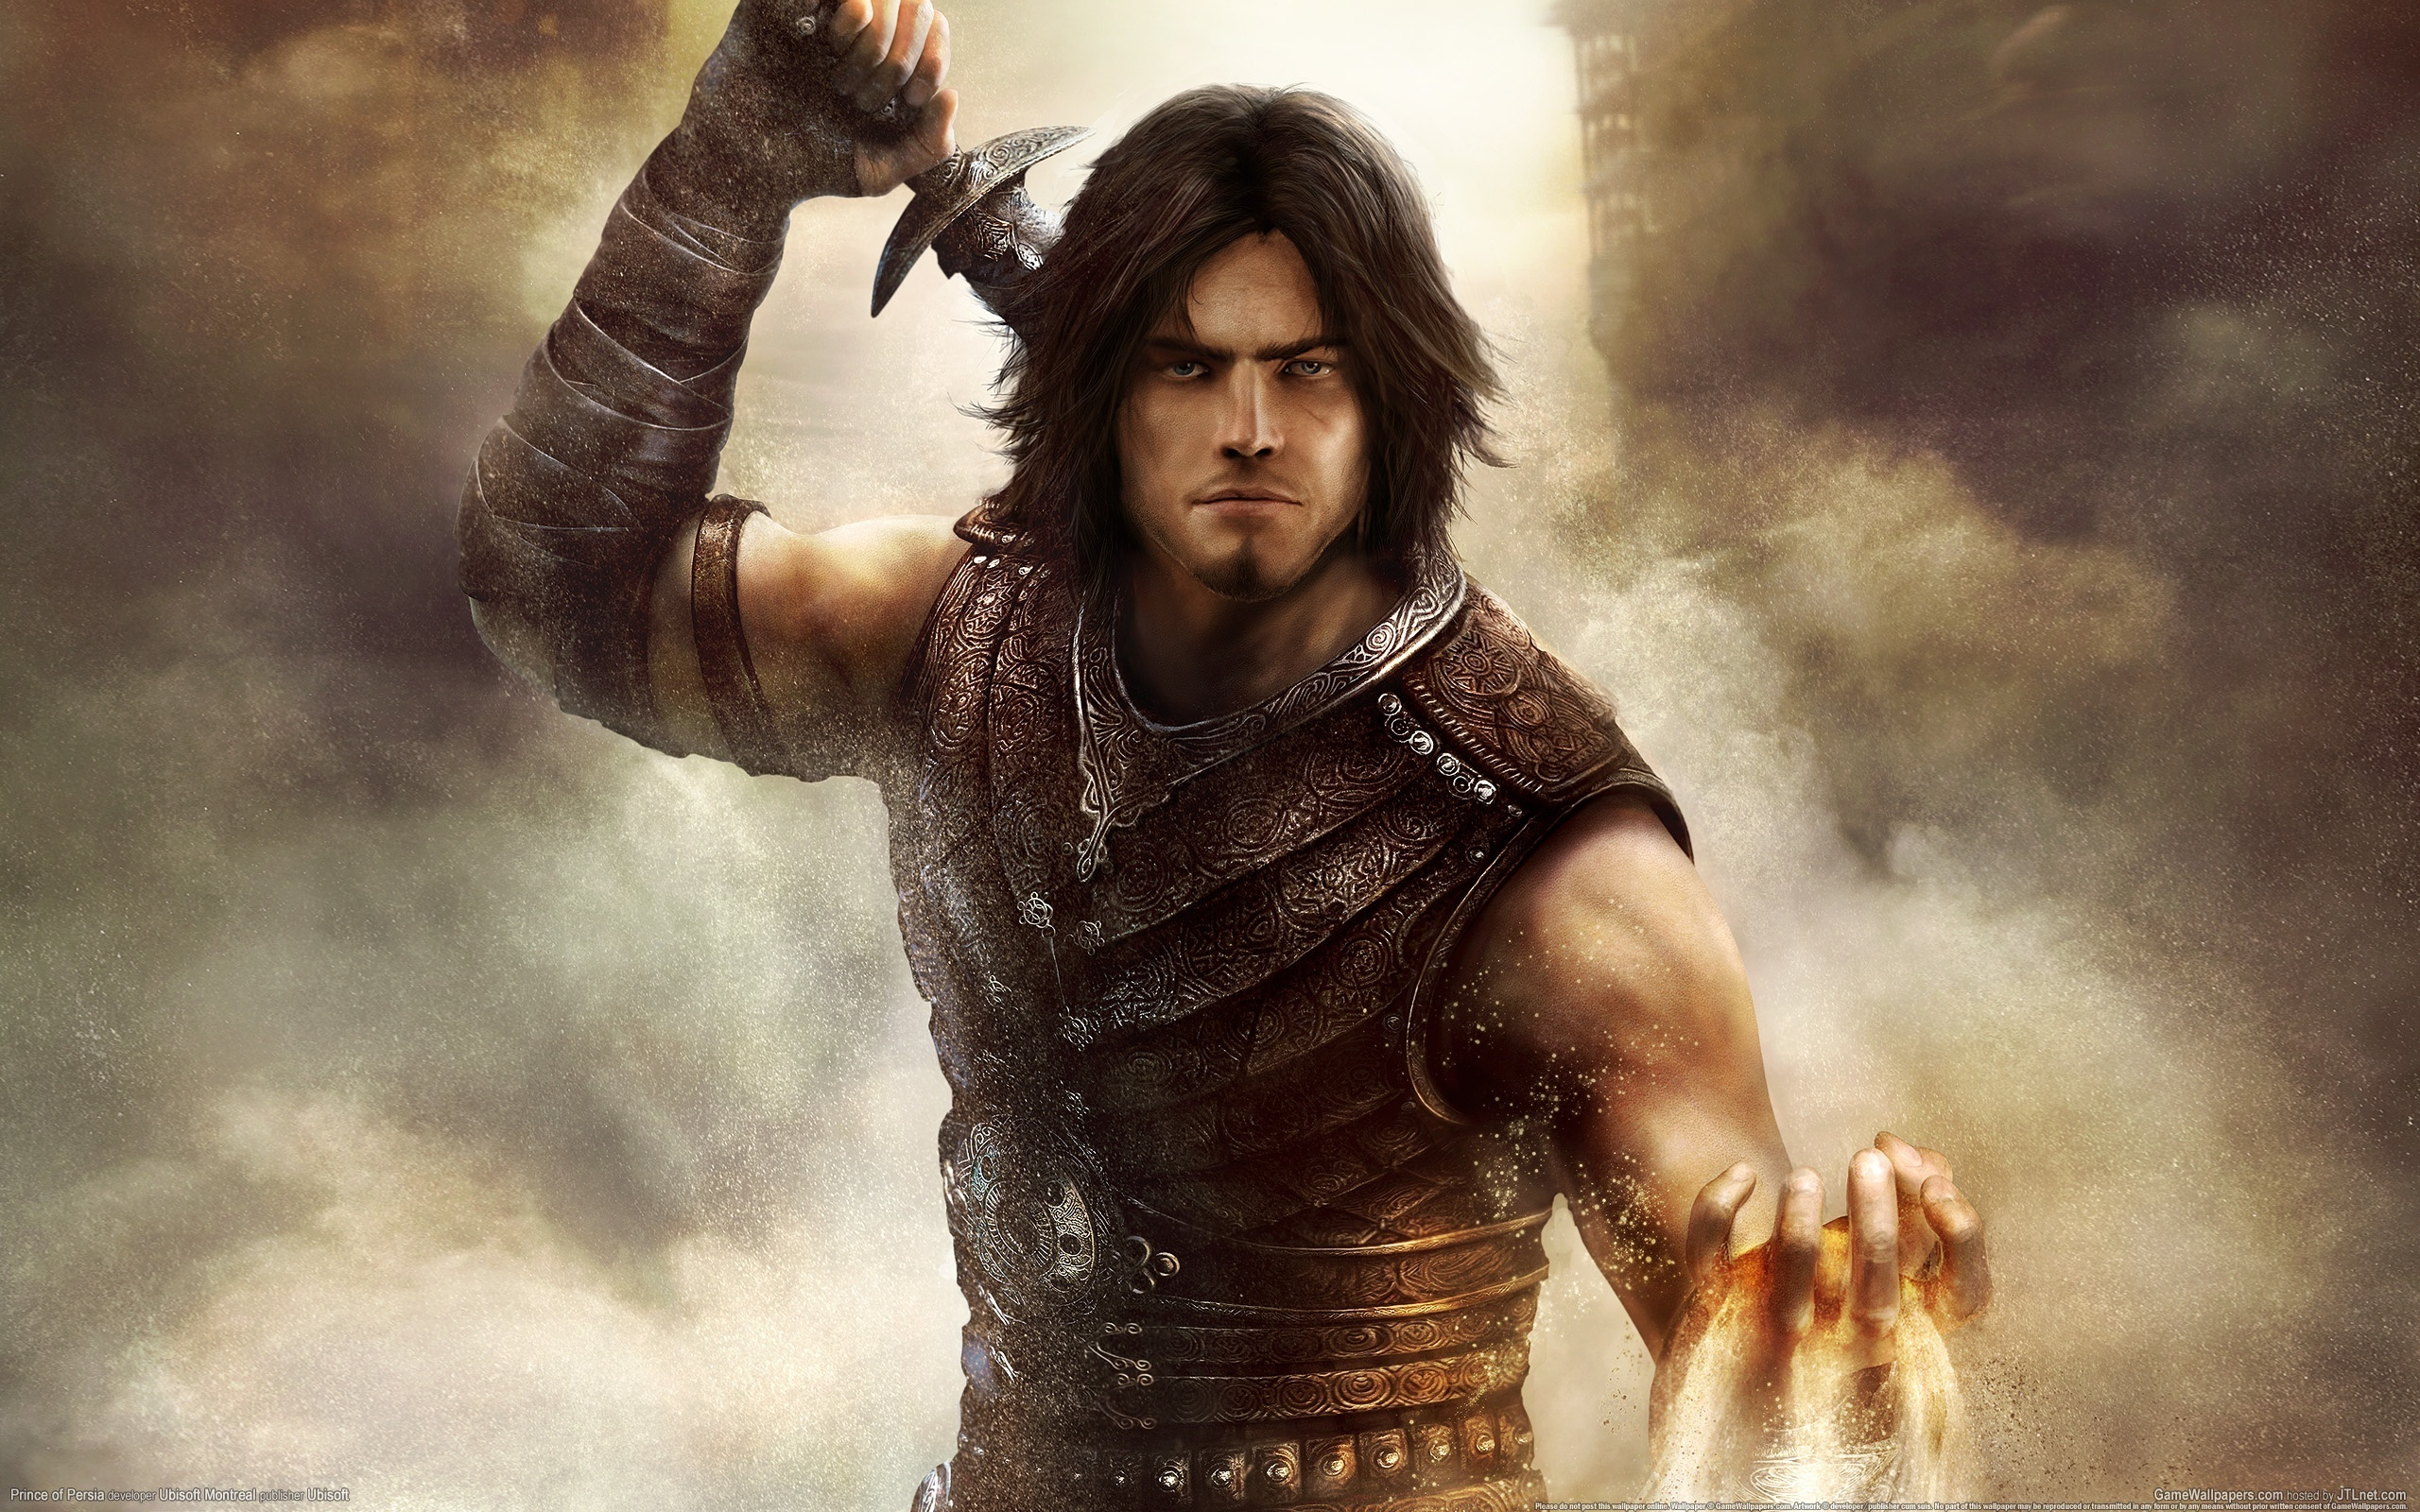 Hd Wallpapers Prince Of Persia The Forgotten Sands - HD Wallpaper 